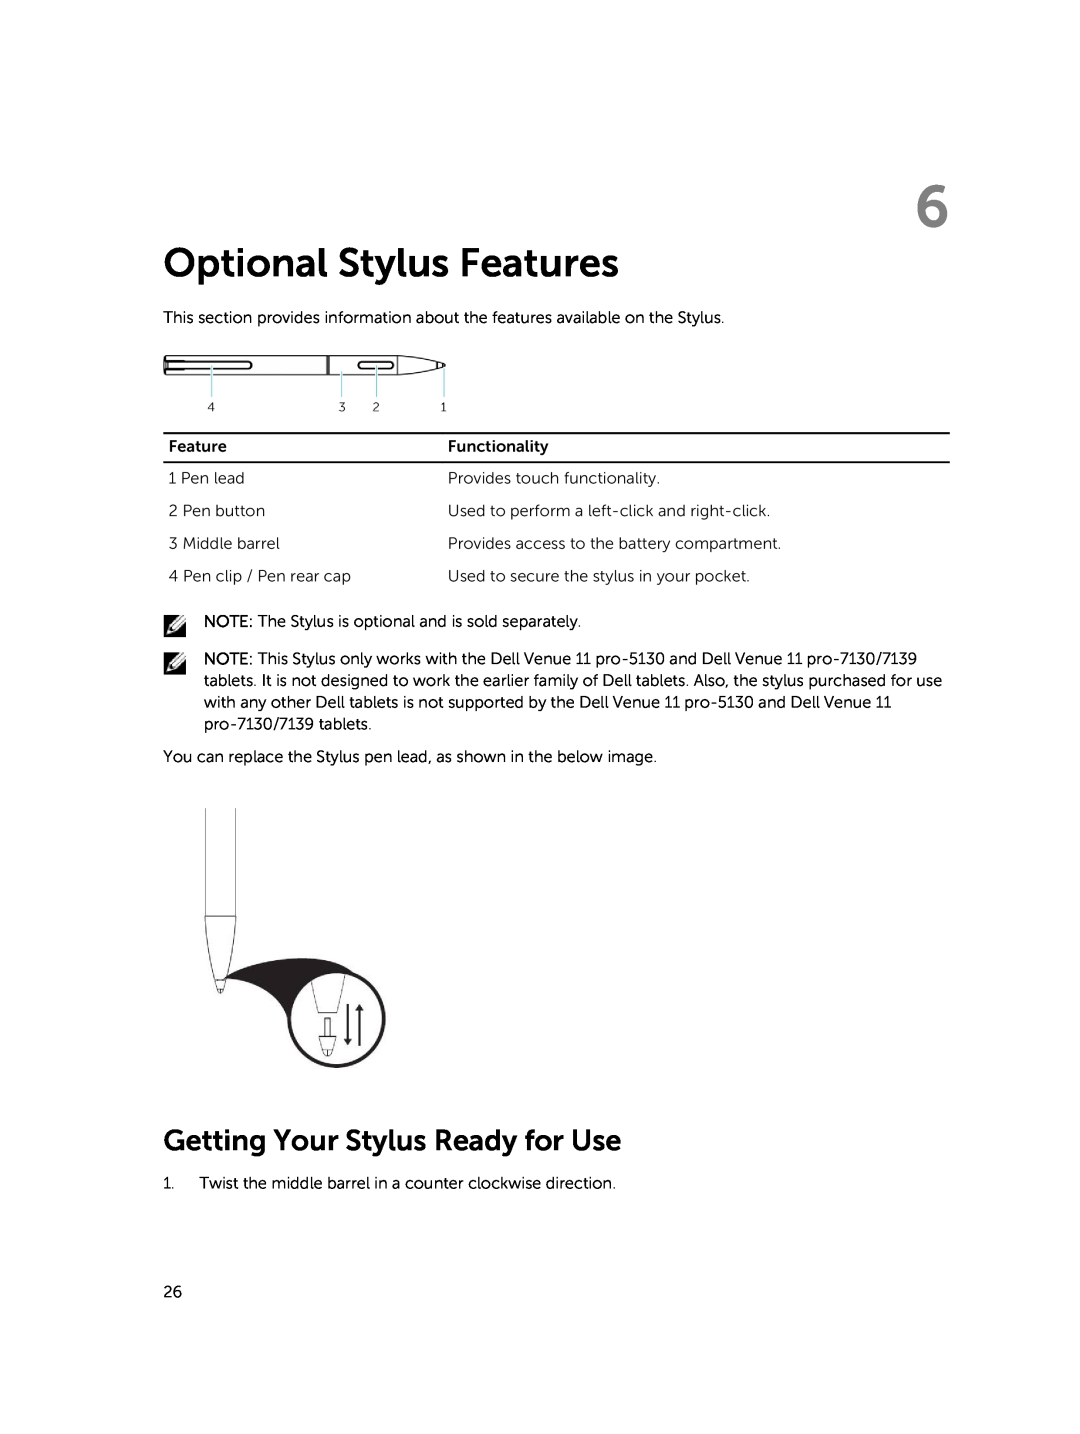 Dell T06G manual Optional Stylus Features, Getting Your Stylus Ready for Use 